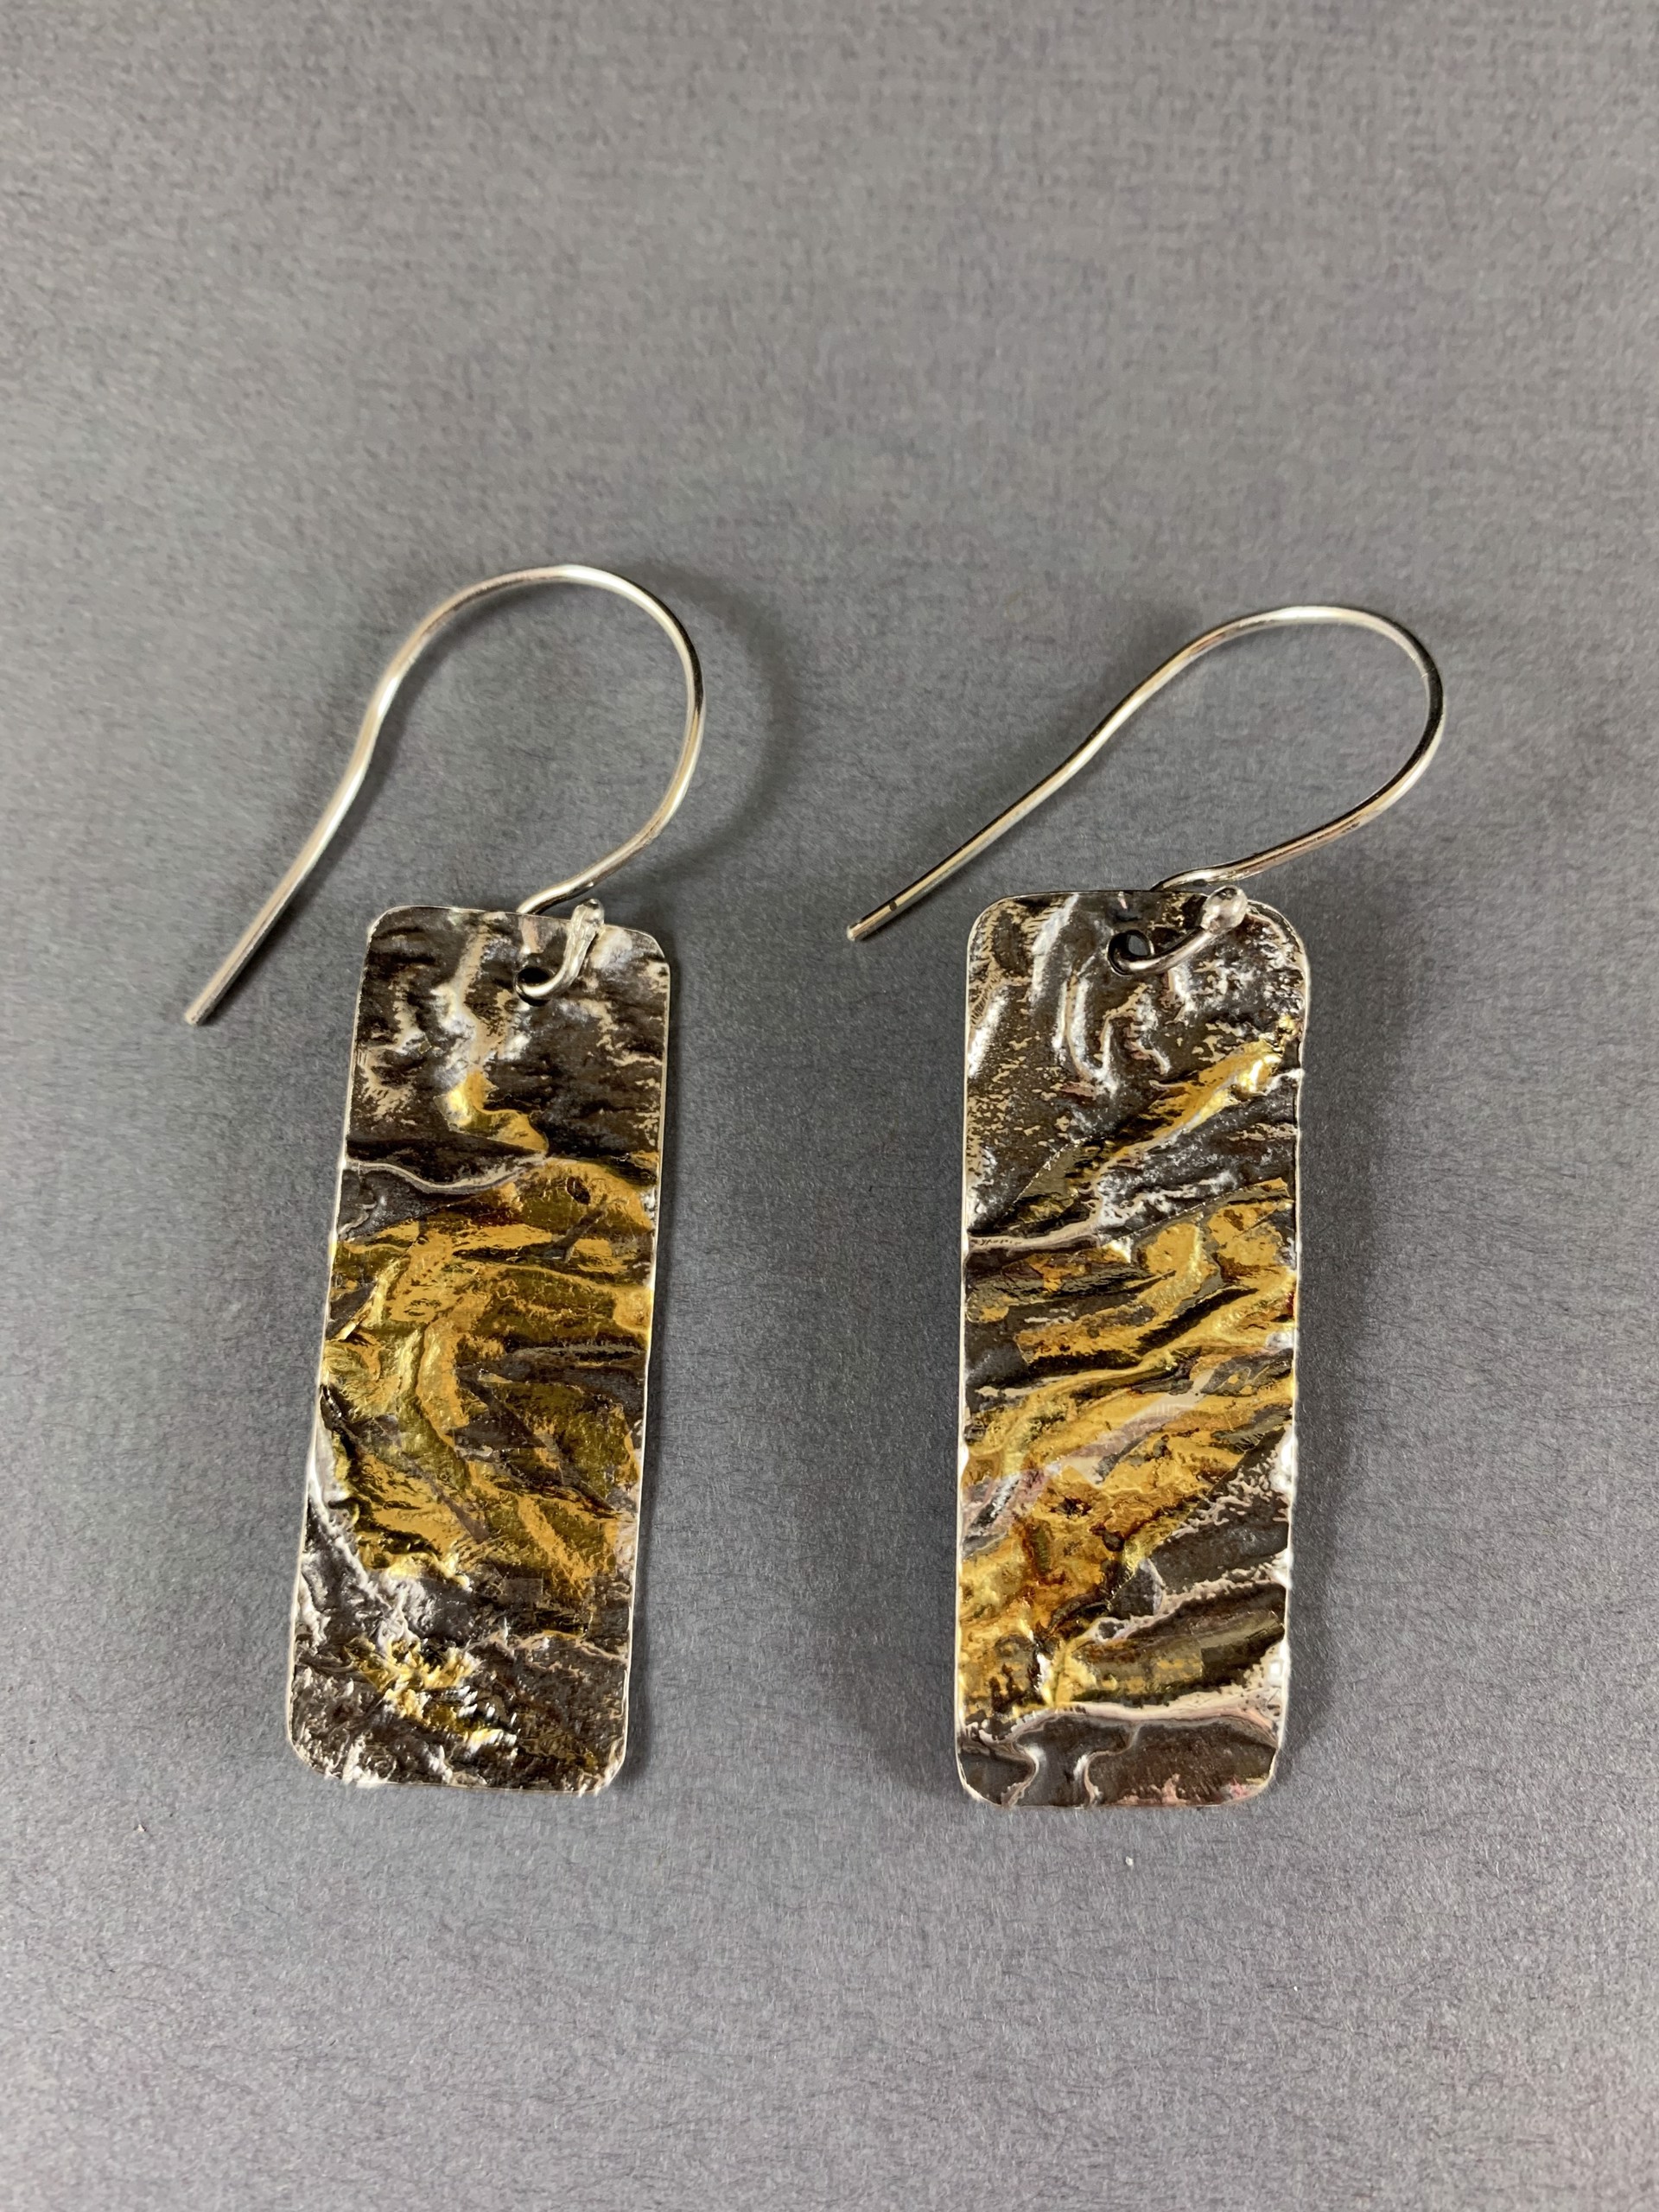 Earrings - Reticulated silver earrings Accented with Gold. Sterling ear wires. AS033 by Amy Soldin